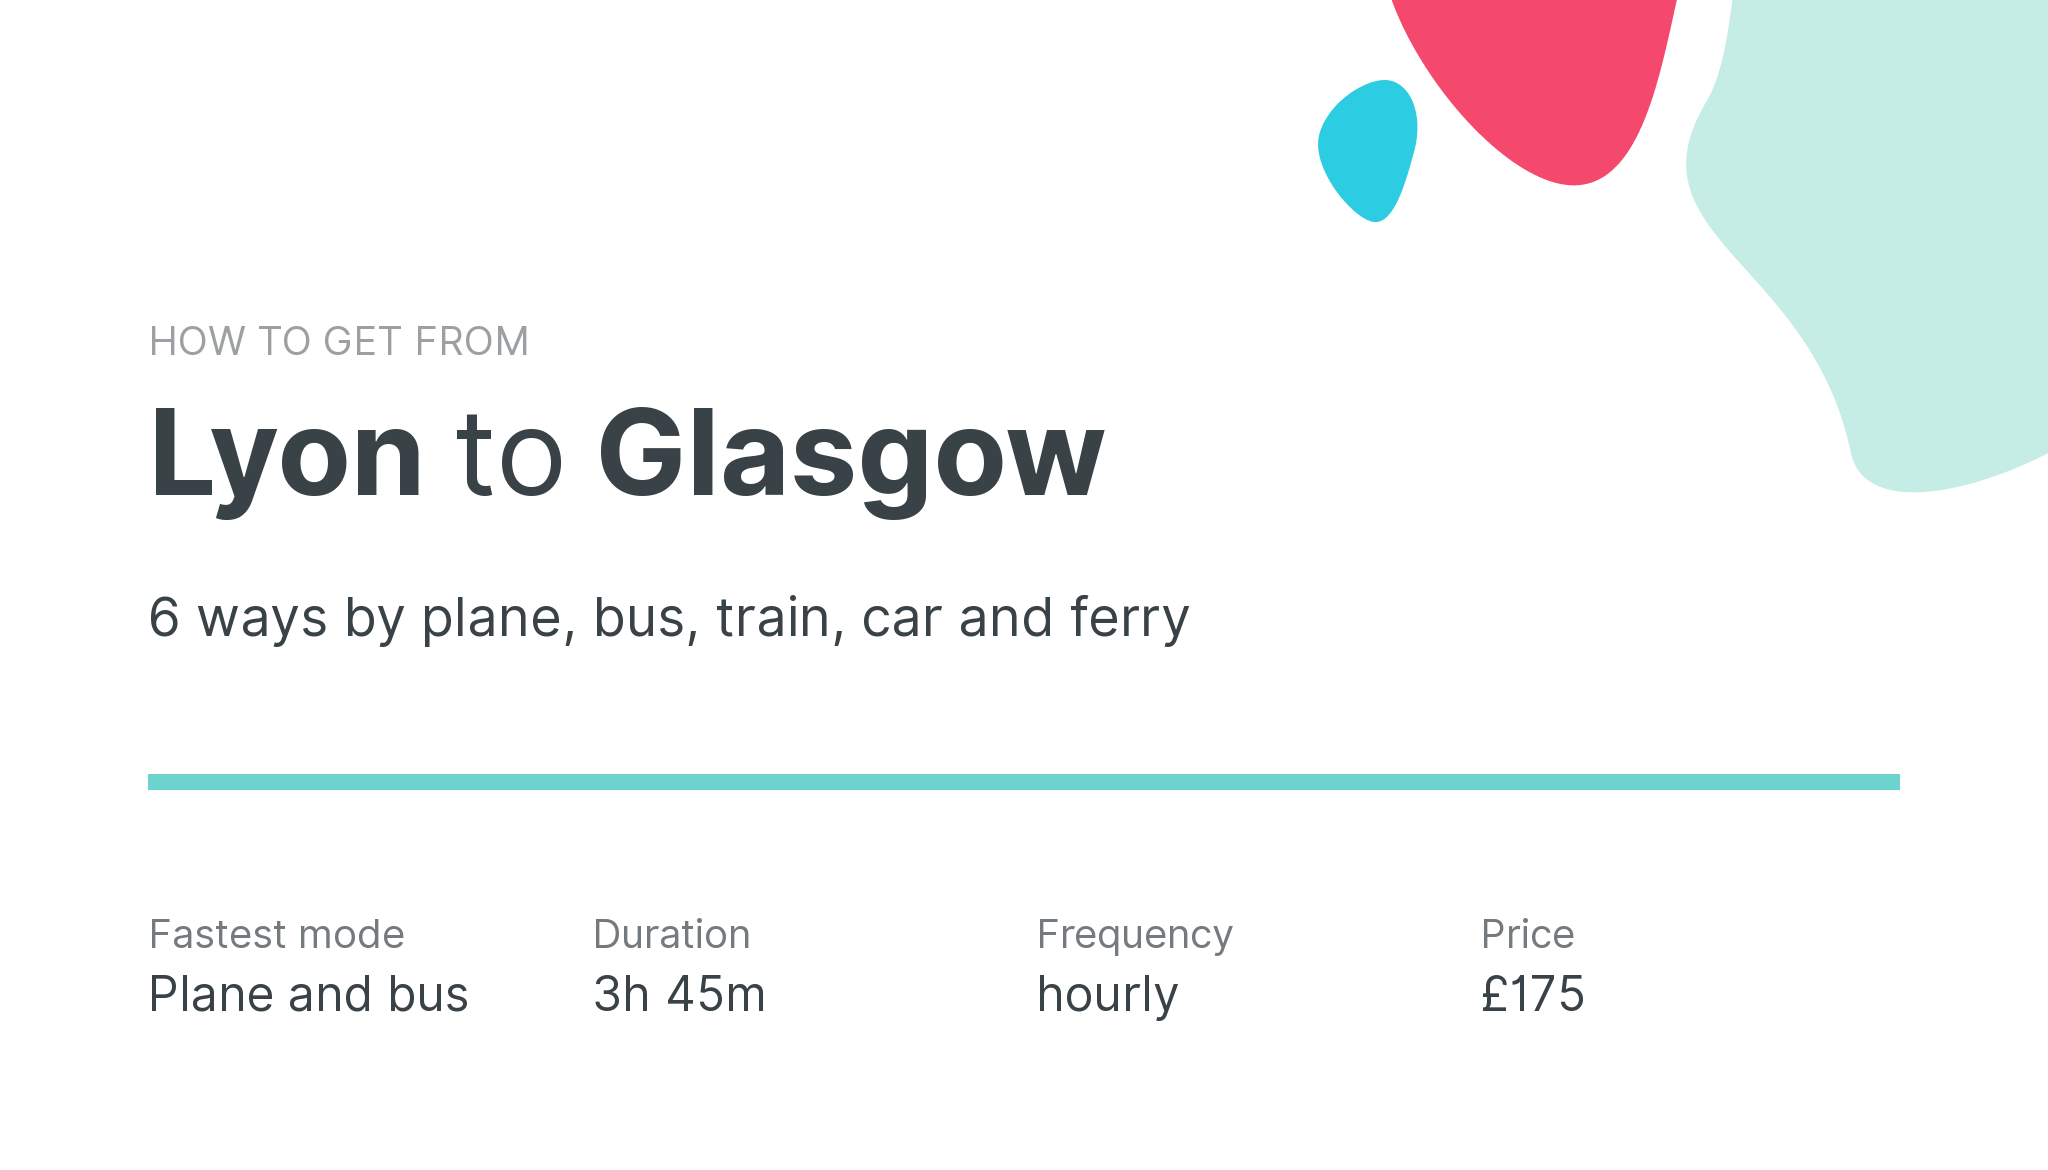 How do I get from Lyon to Glasgow